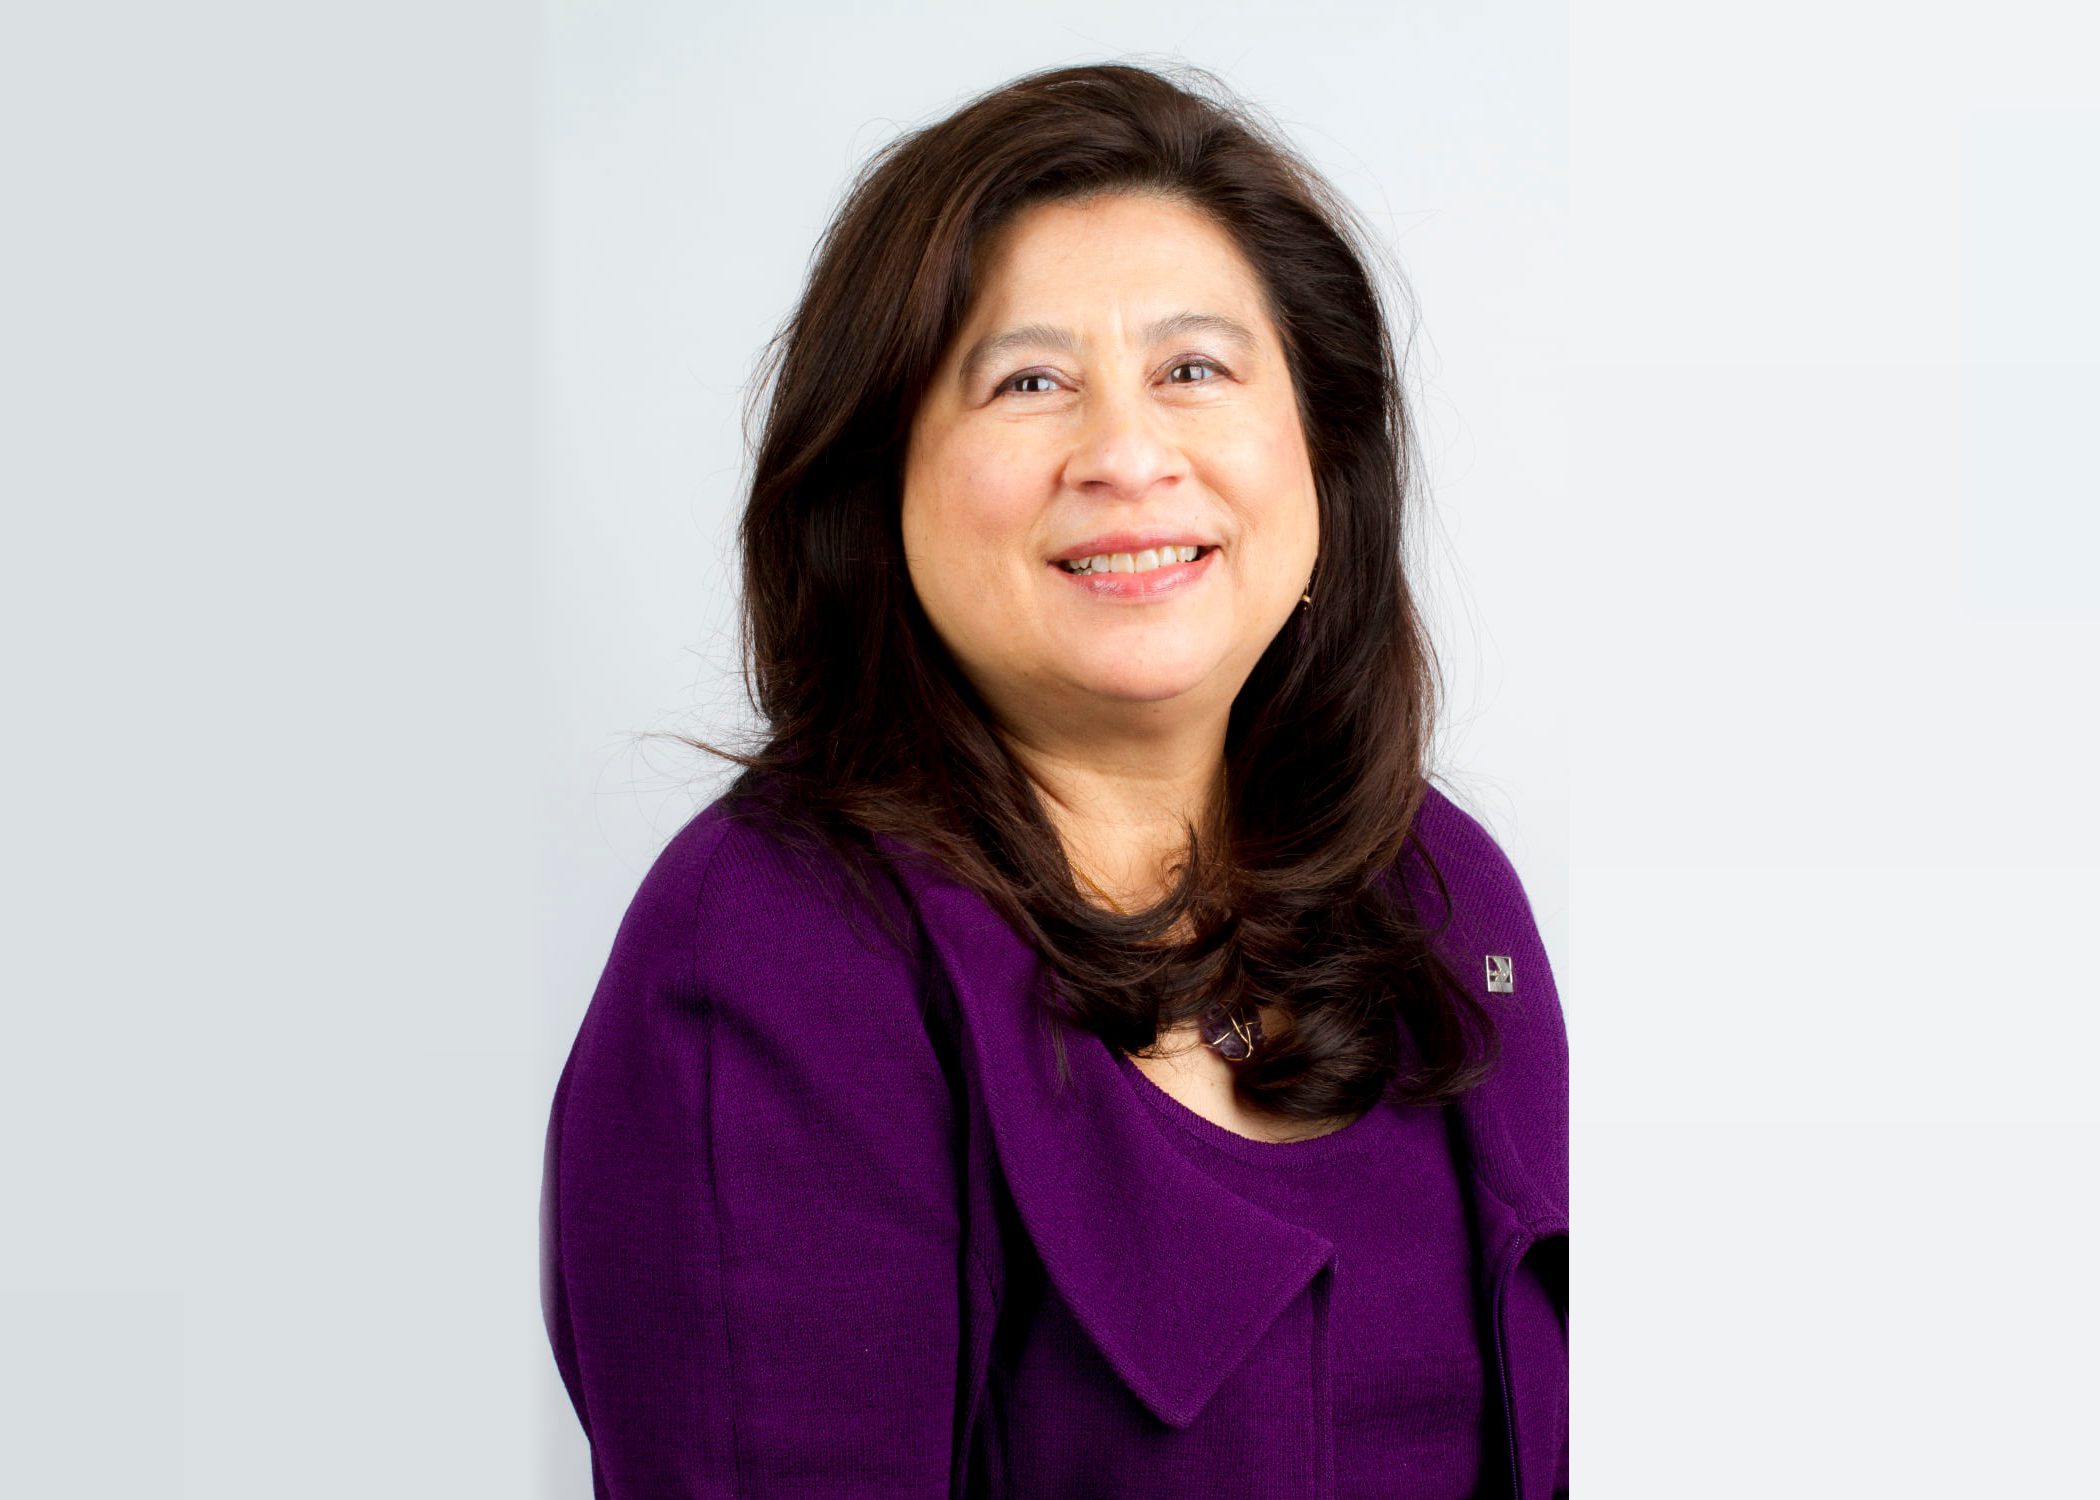 Michele Wong Krause - Chair of Board of Directors